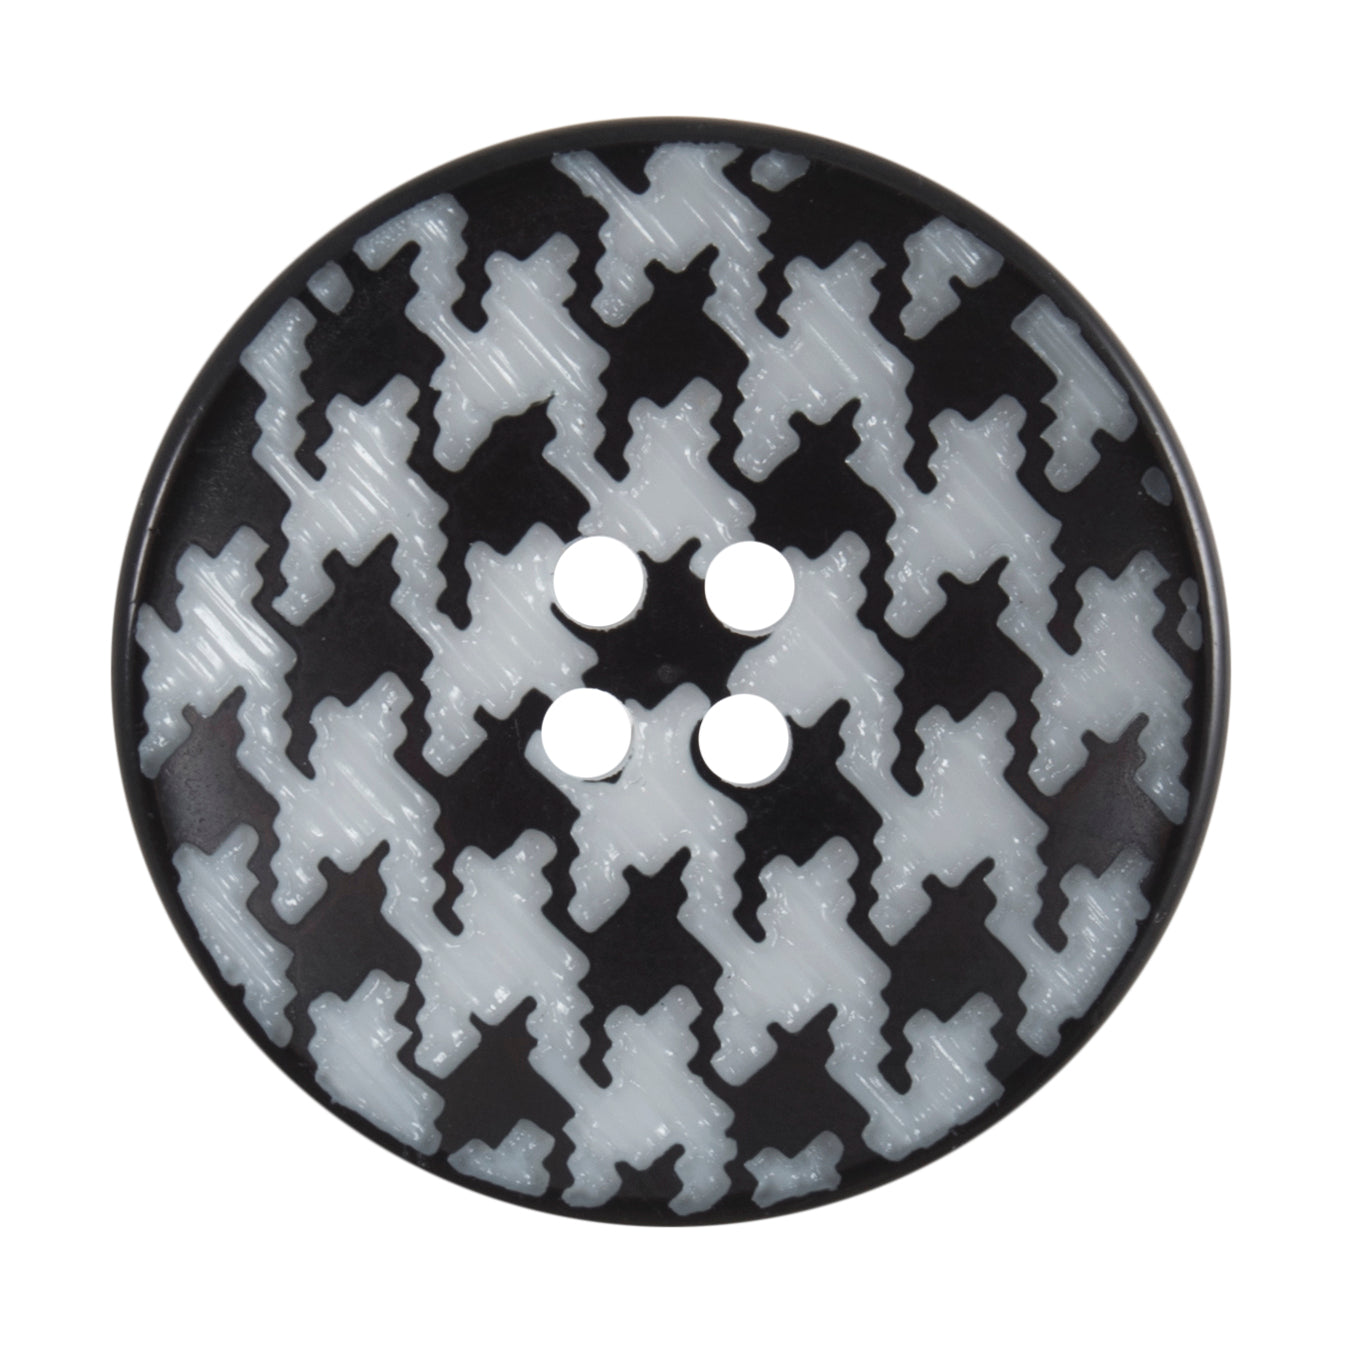 Black & White Patterned 4 Hole Button - 25mm [LD18.4]